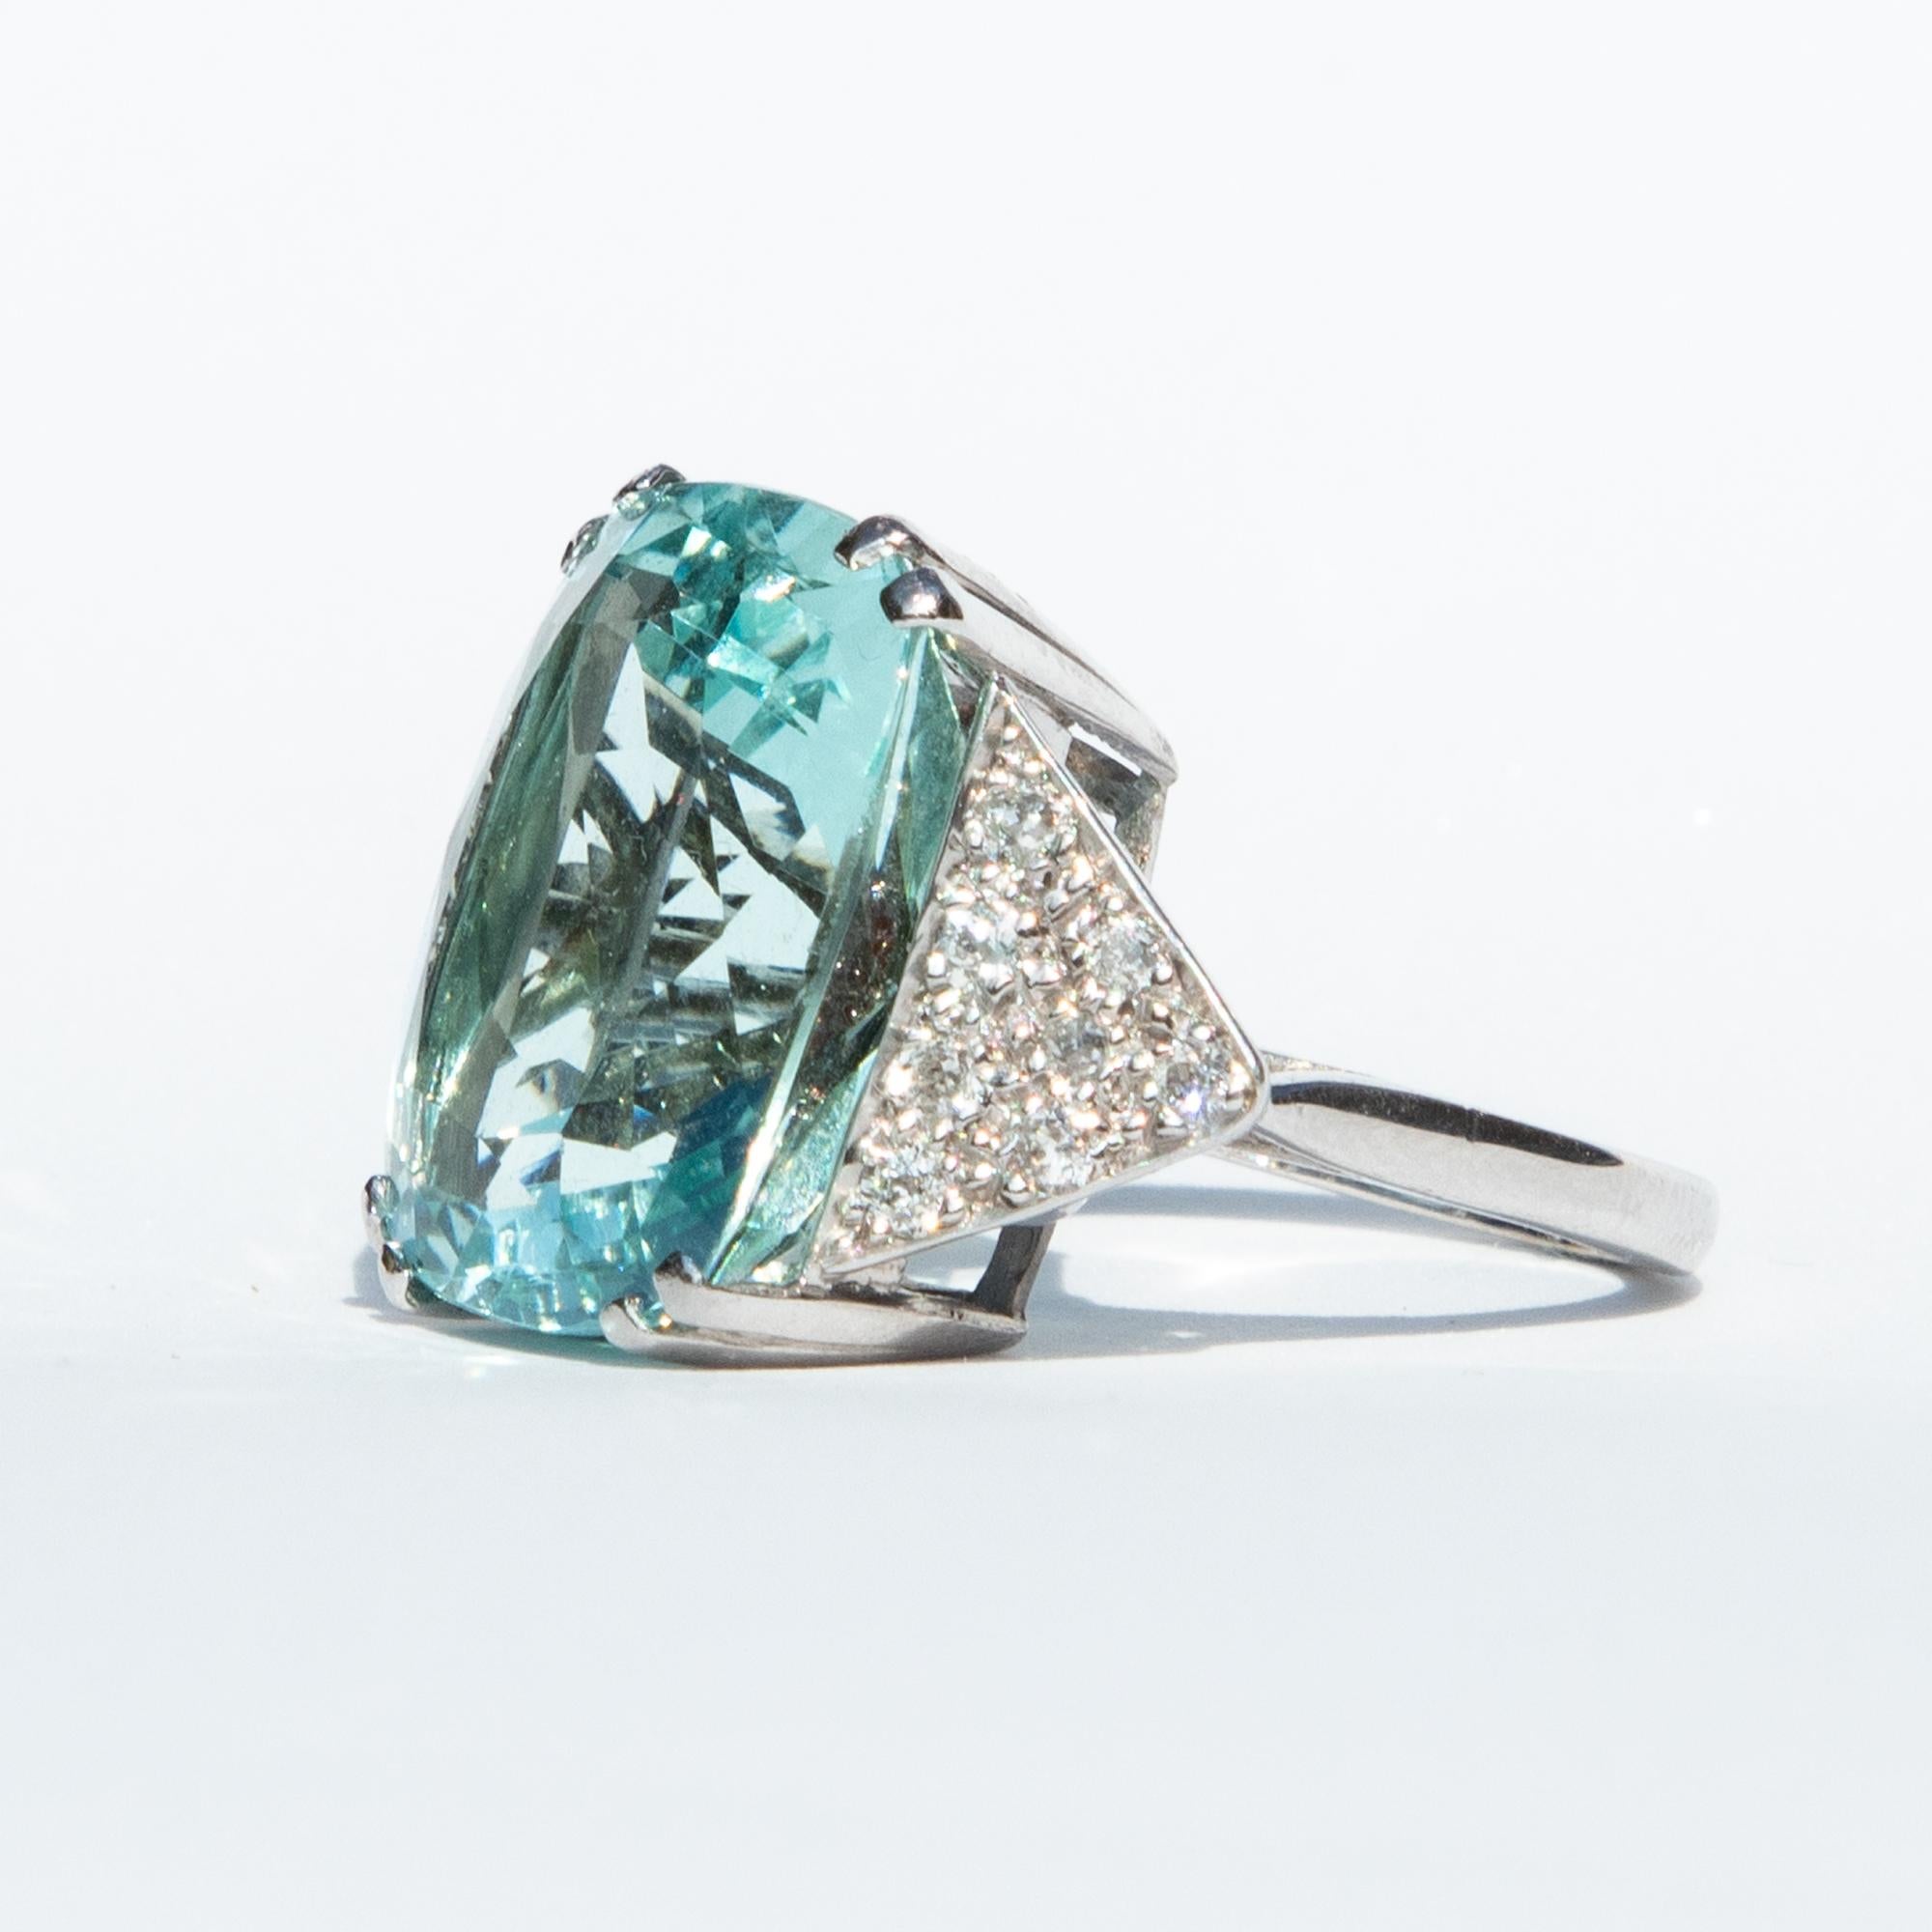 A wonderful ring from the 1960s. The large central Aquamarine weighs in excess of 20 carats, and is surrounded by diamonds in a triangular 18 karat white gold setting.

Ring size J 1/2 or 5. 